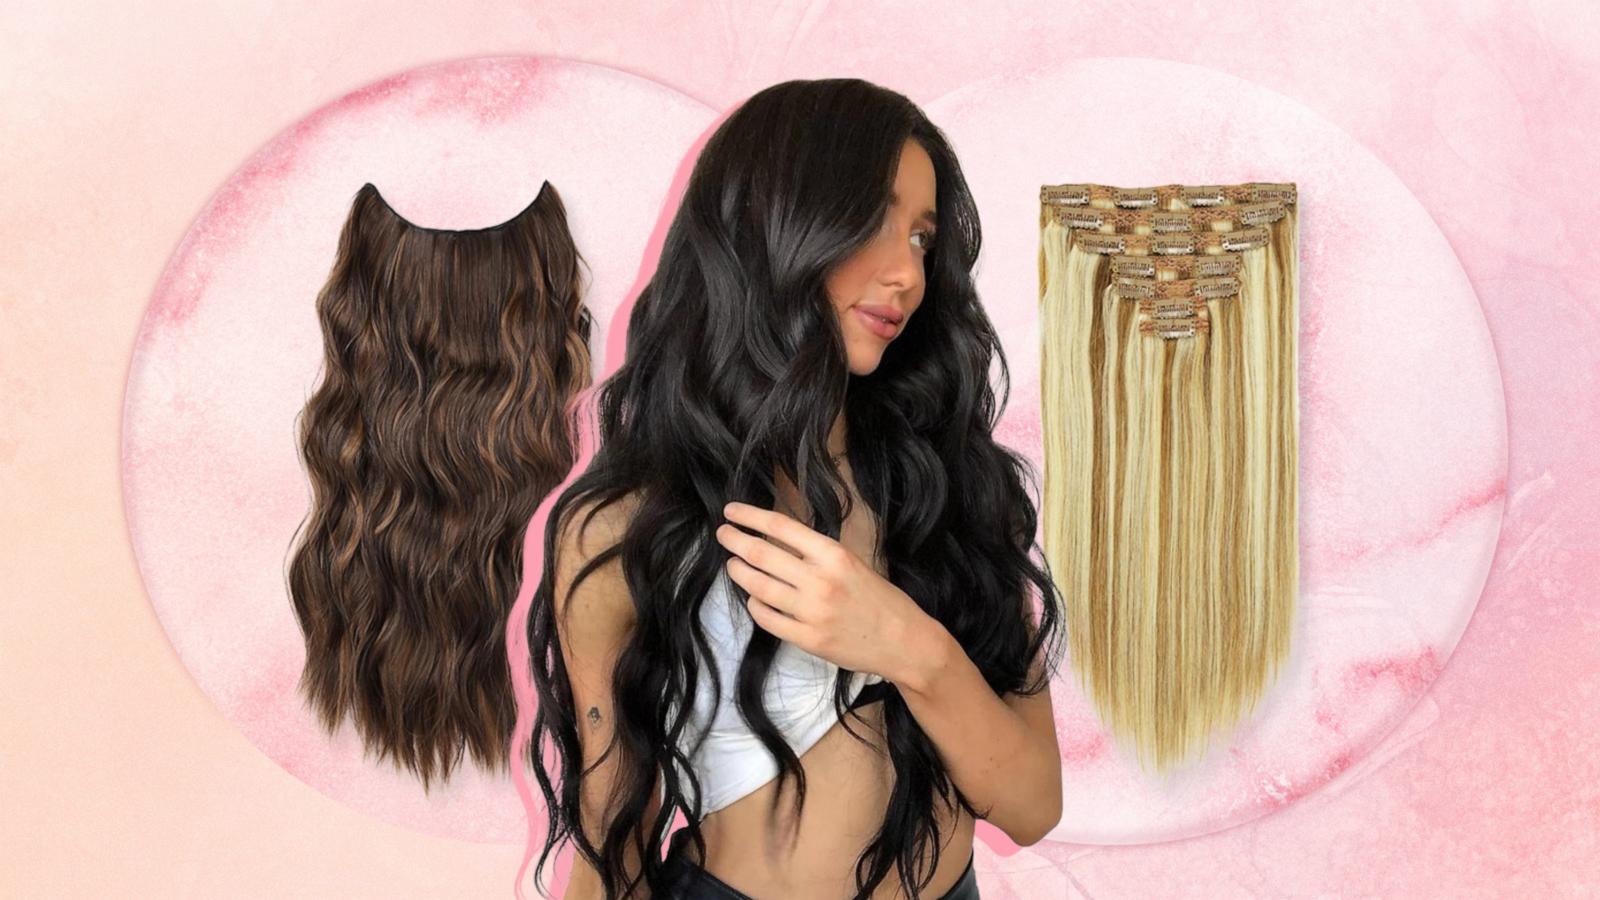 14 Best Hair Extensions of 2024: Best Clip Ins According to Stylists